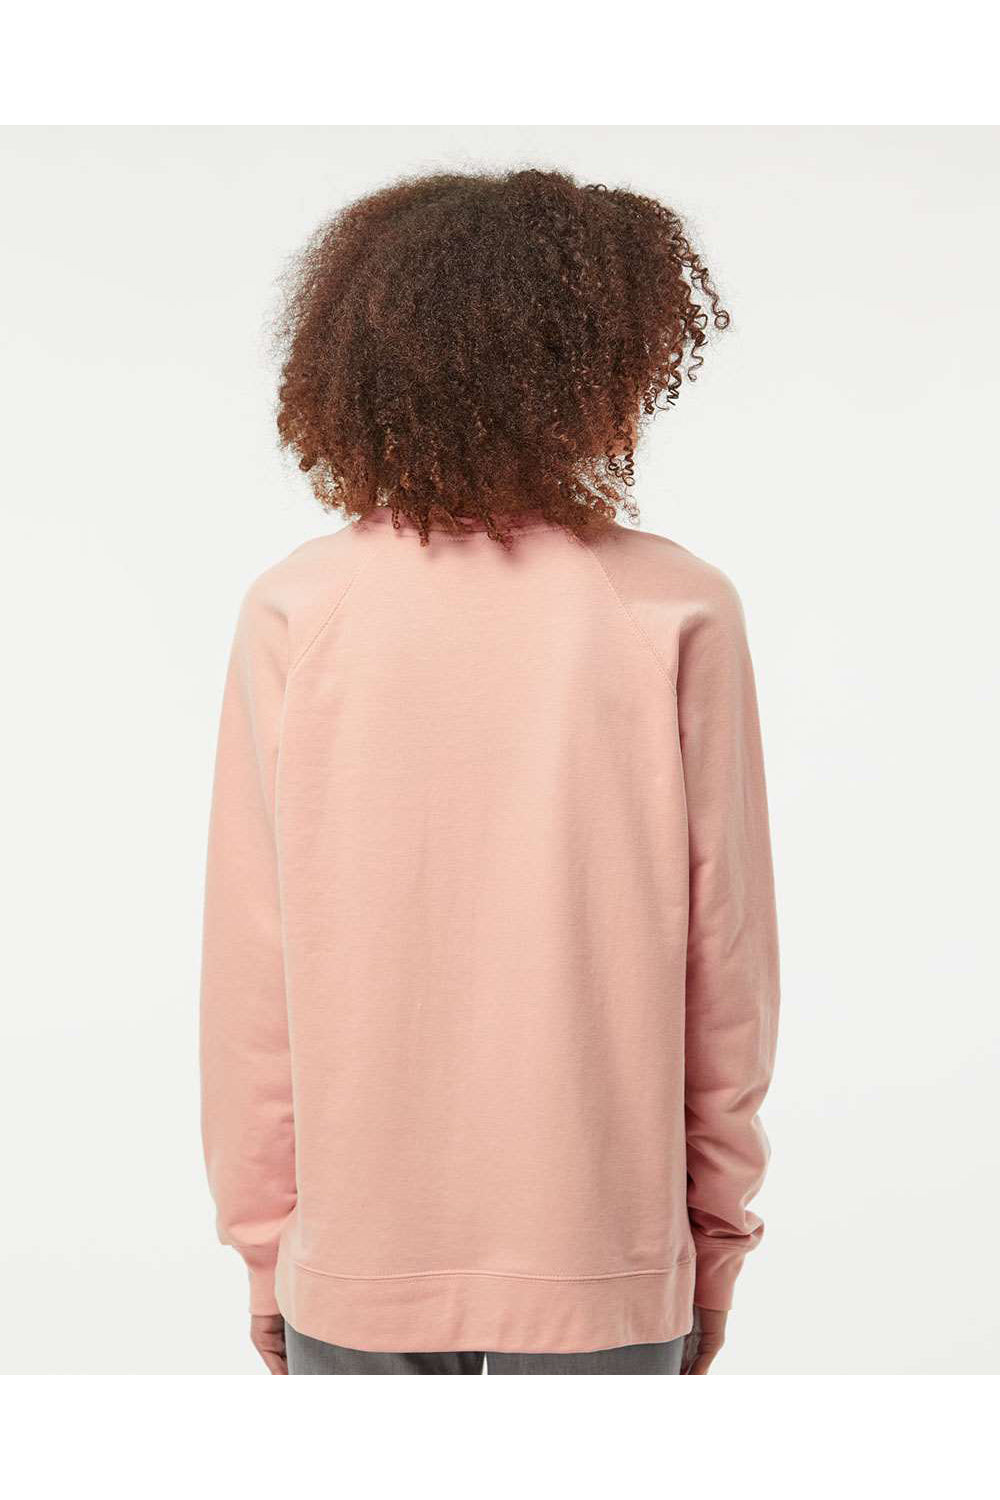 Independent Trading Co. SS1000C Mens Icon Loopback Terry Crewneck Sweatshirt Rose Pink Model Back